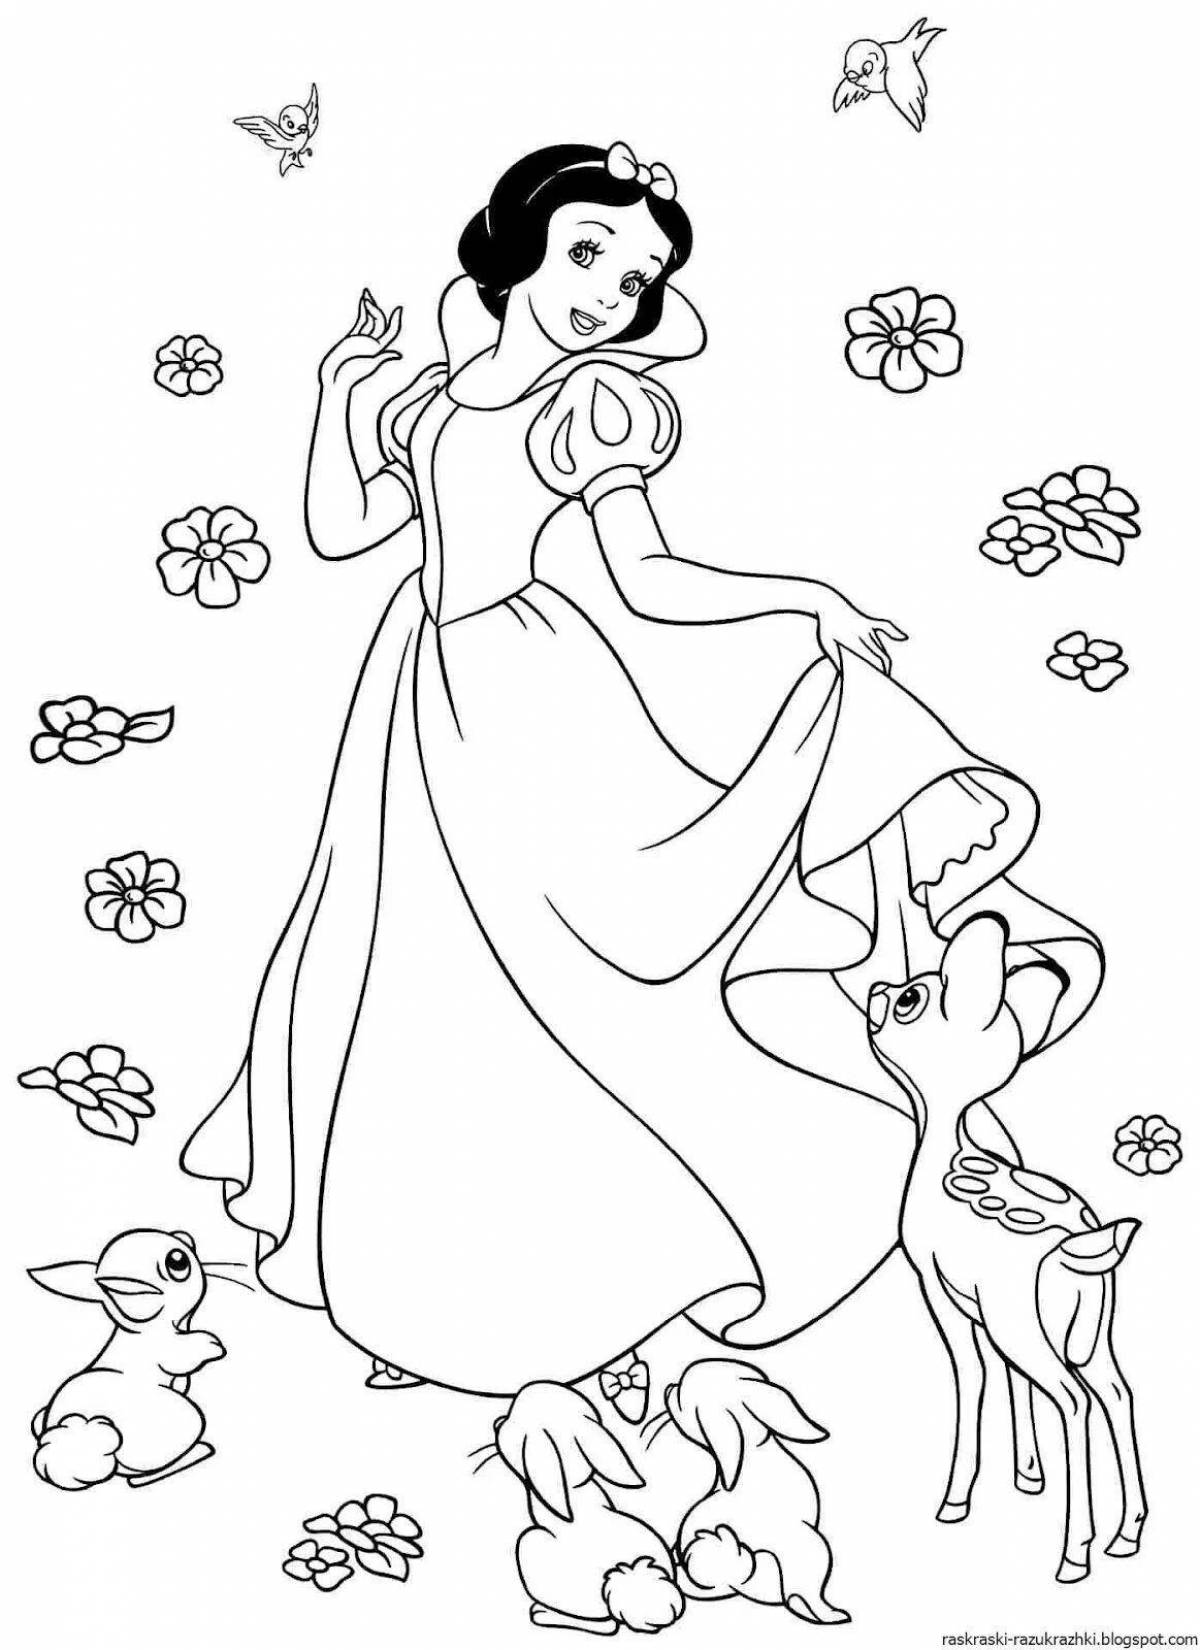 Exquisite disney coloring book for 6-7 year olds